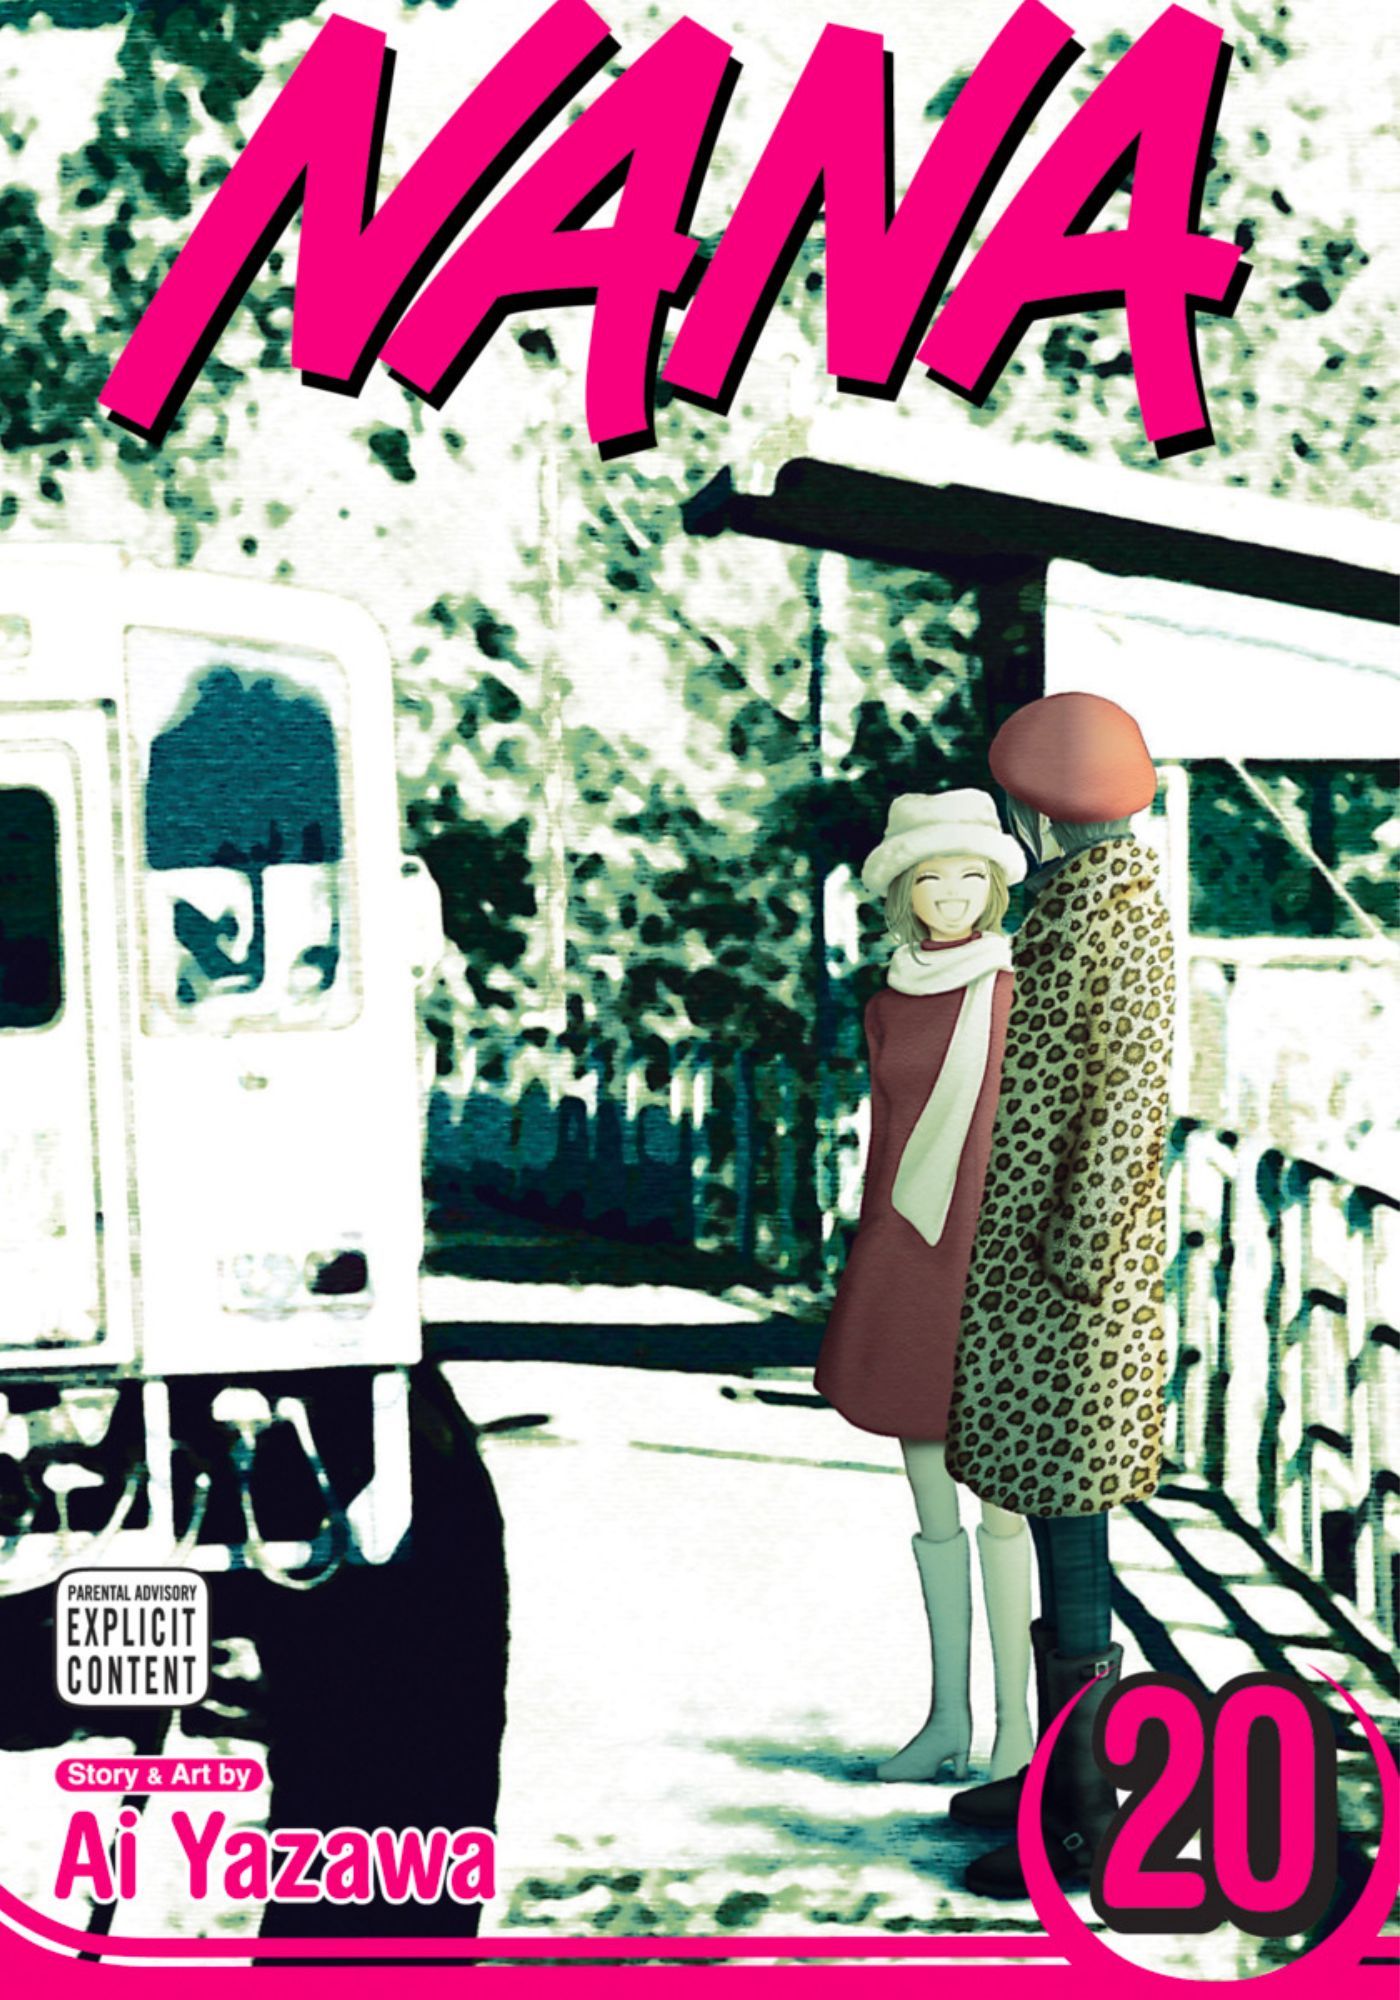 Nana volume 20 cover art featuring Nana and Hachi standing together, waiting for a train to go back home.